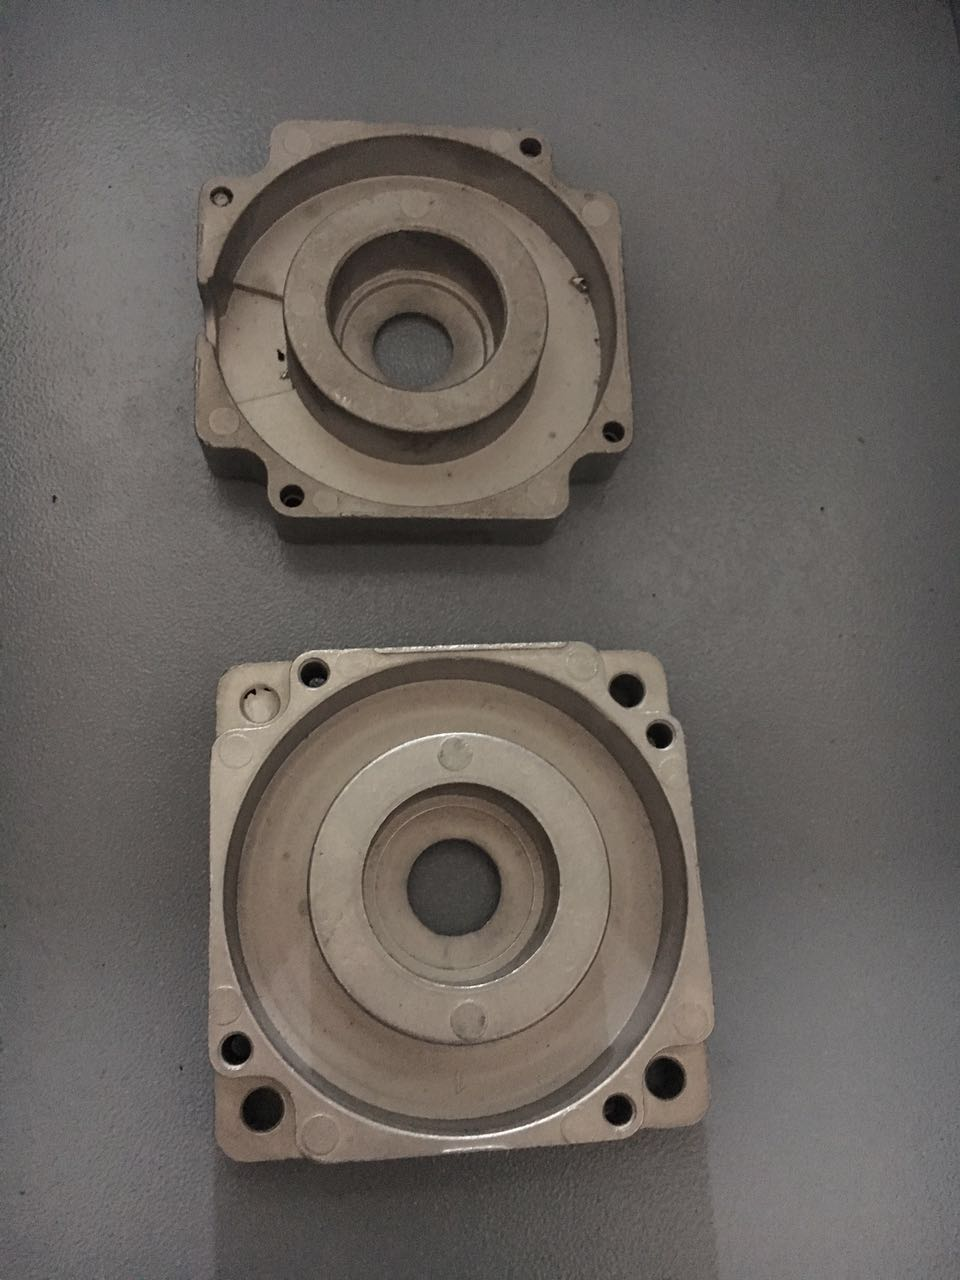 Customer case of motor end-cover parts